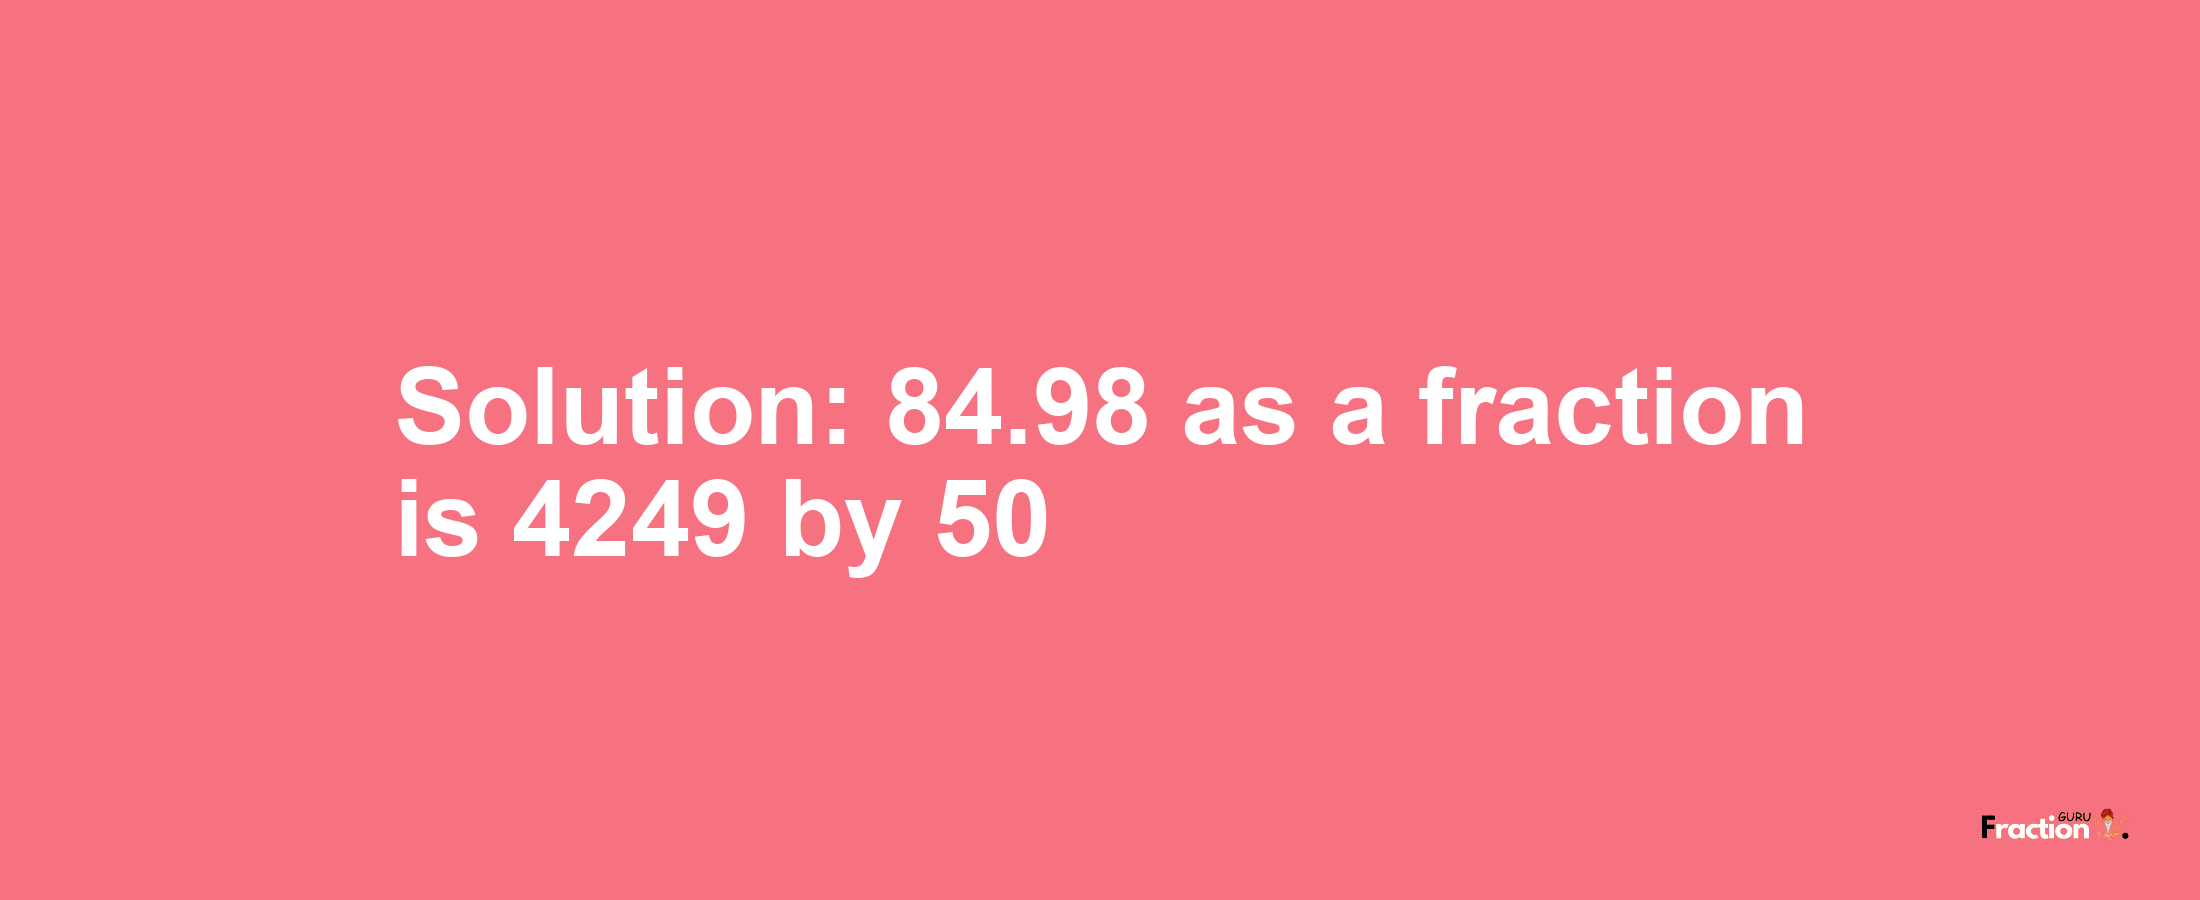 Solution:84.98 as a fraction is 4249/50